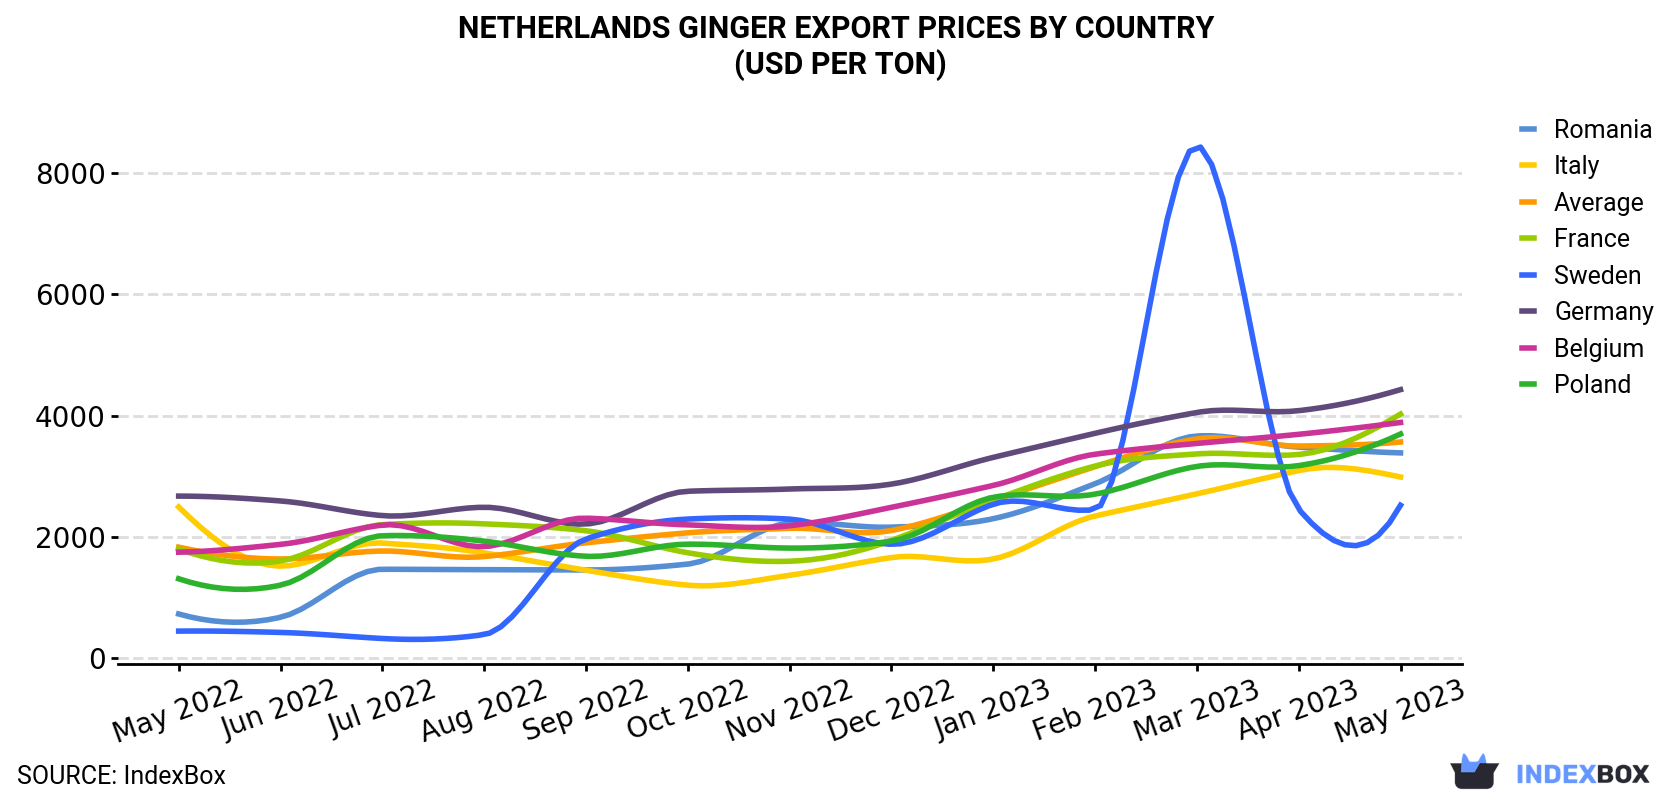 Netherlands Ginger Export Prices By Country (USD Per Ton)